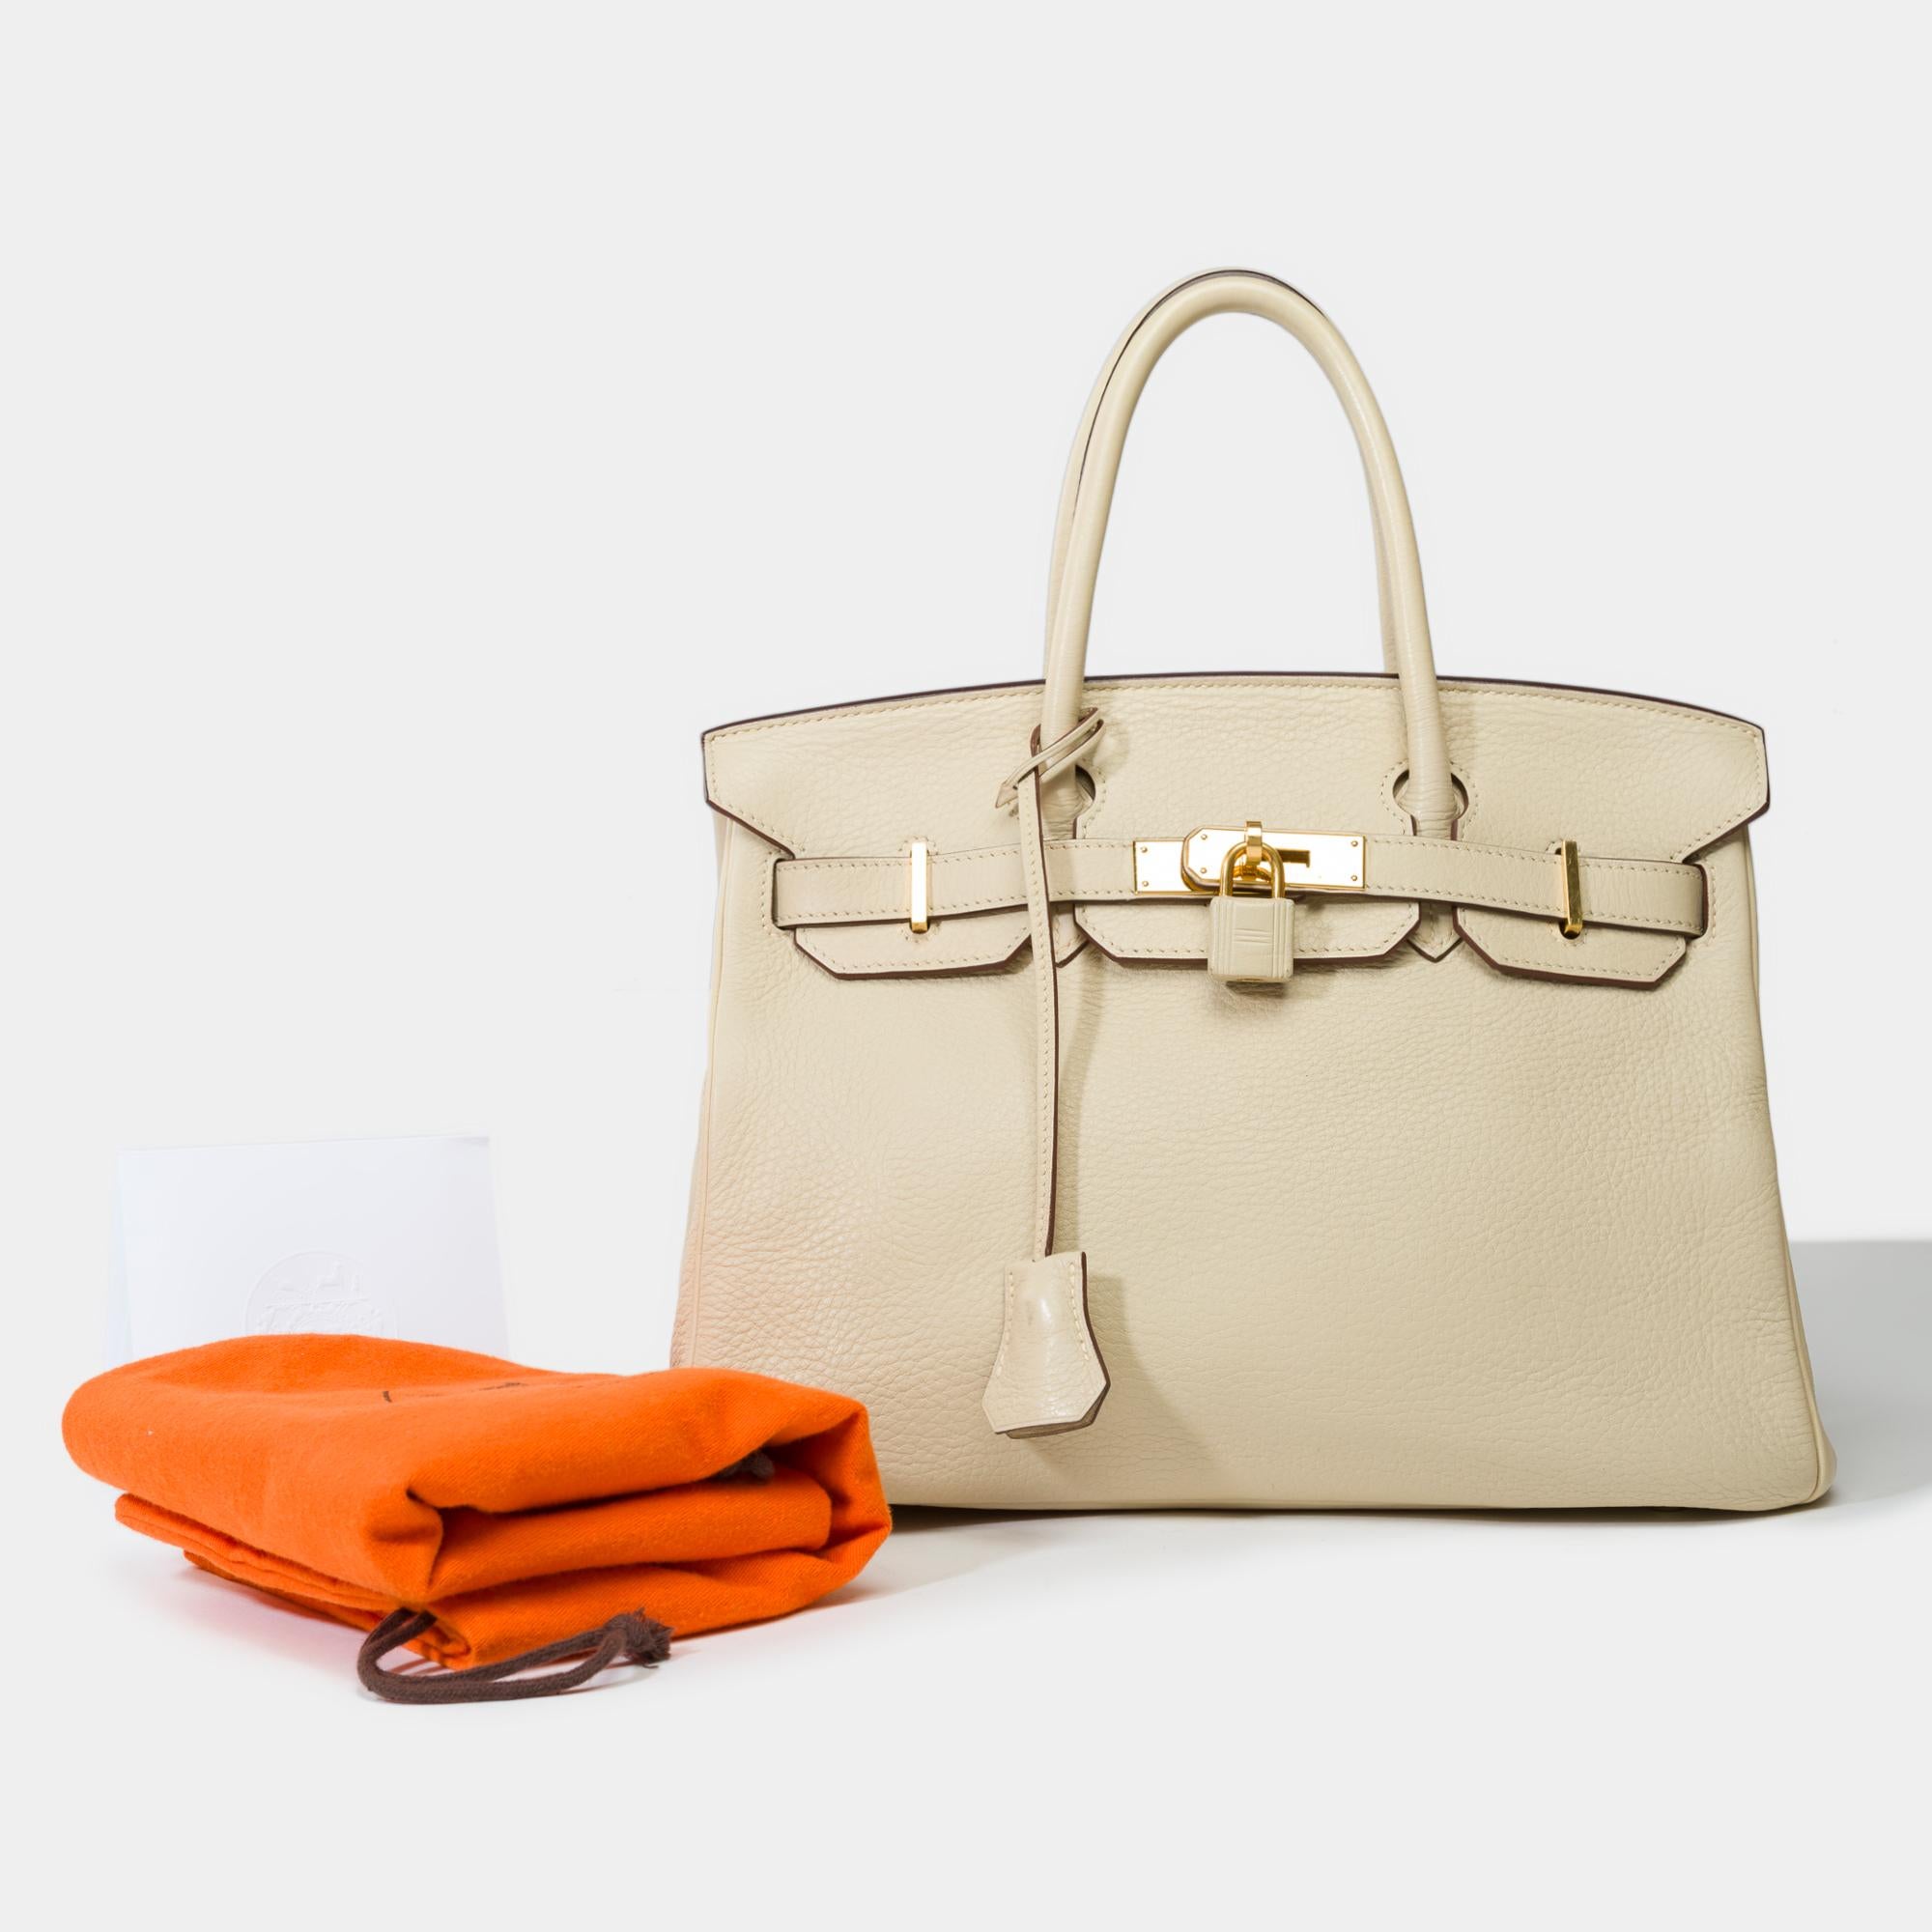 Stunning​ ​Hermes​ ​Birkin​ ​30​ ​in​ ​Parchemin​ ​Togo​ ​leather,​ ​gold​ ​plated​ ​metal​ ​trim​ ​,​ ​double​ ​handle​ ​in​ ​beige​ ​leather​ ​allowing​ ​a​ ​hand​ ​carry

Flap​ ​closure
Inner​ ​lining​ ​in​ ​beige​ ​leather​ ​,​ ​a​ ​zippered​